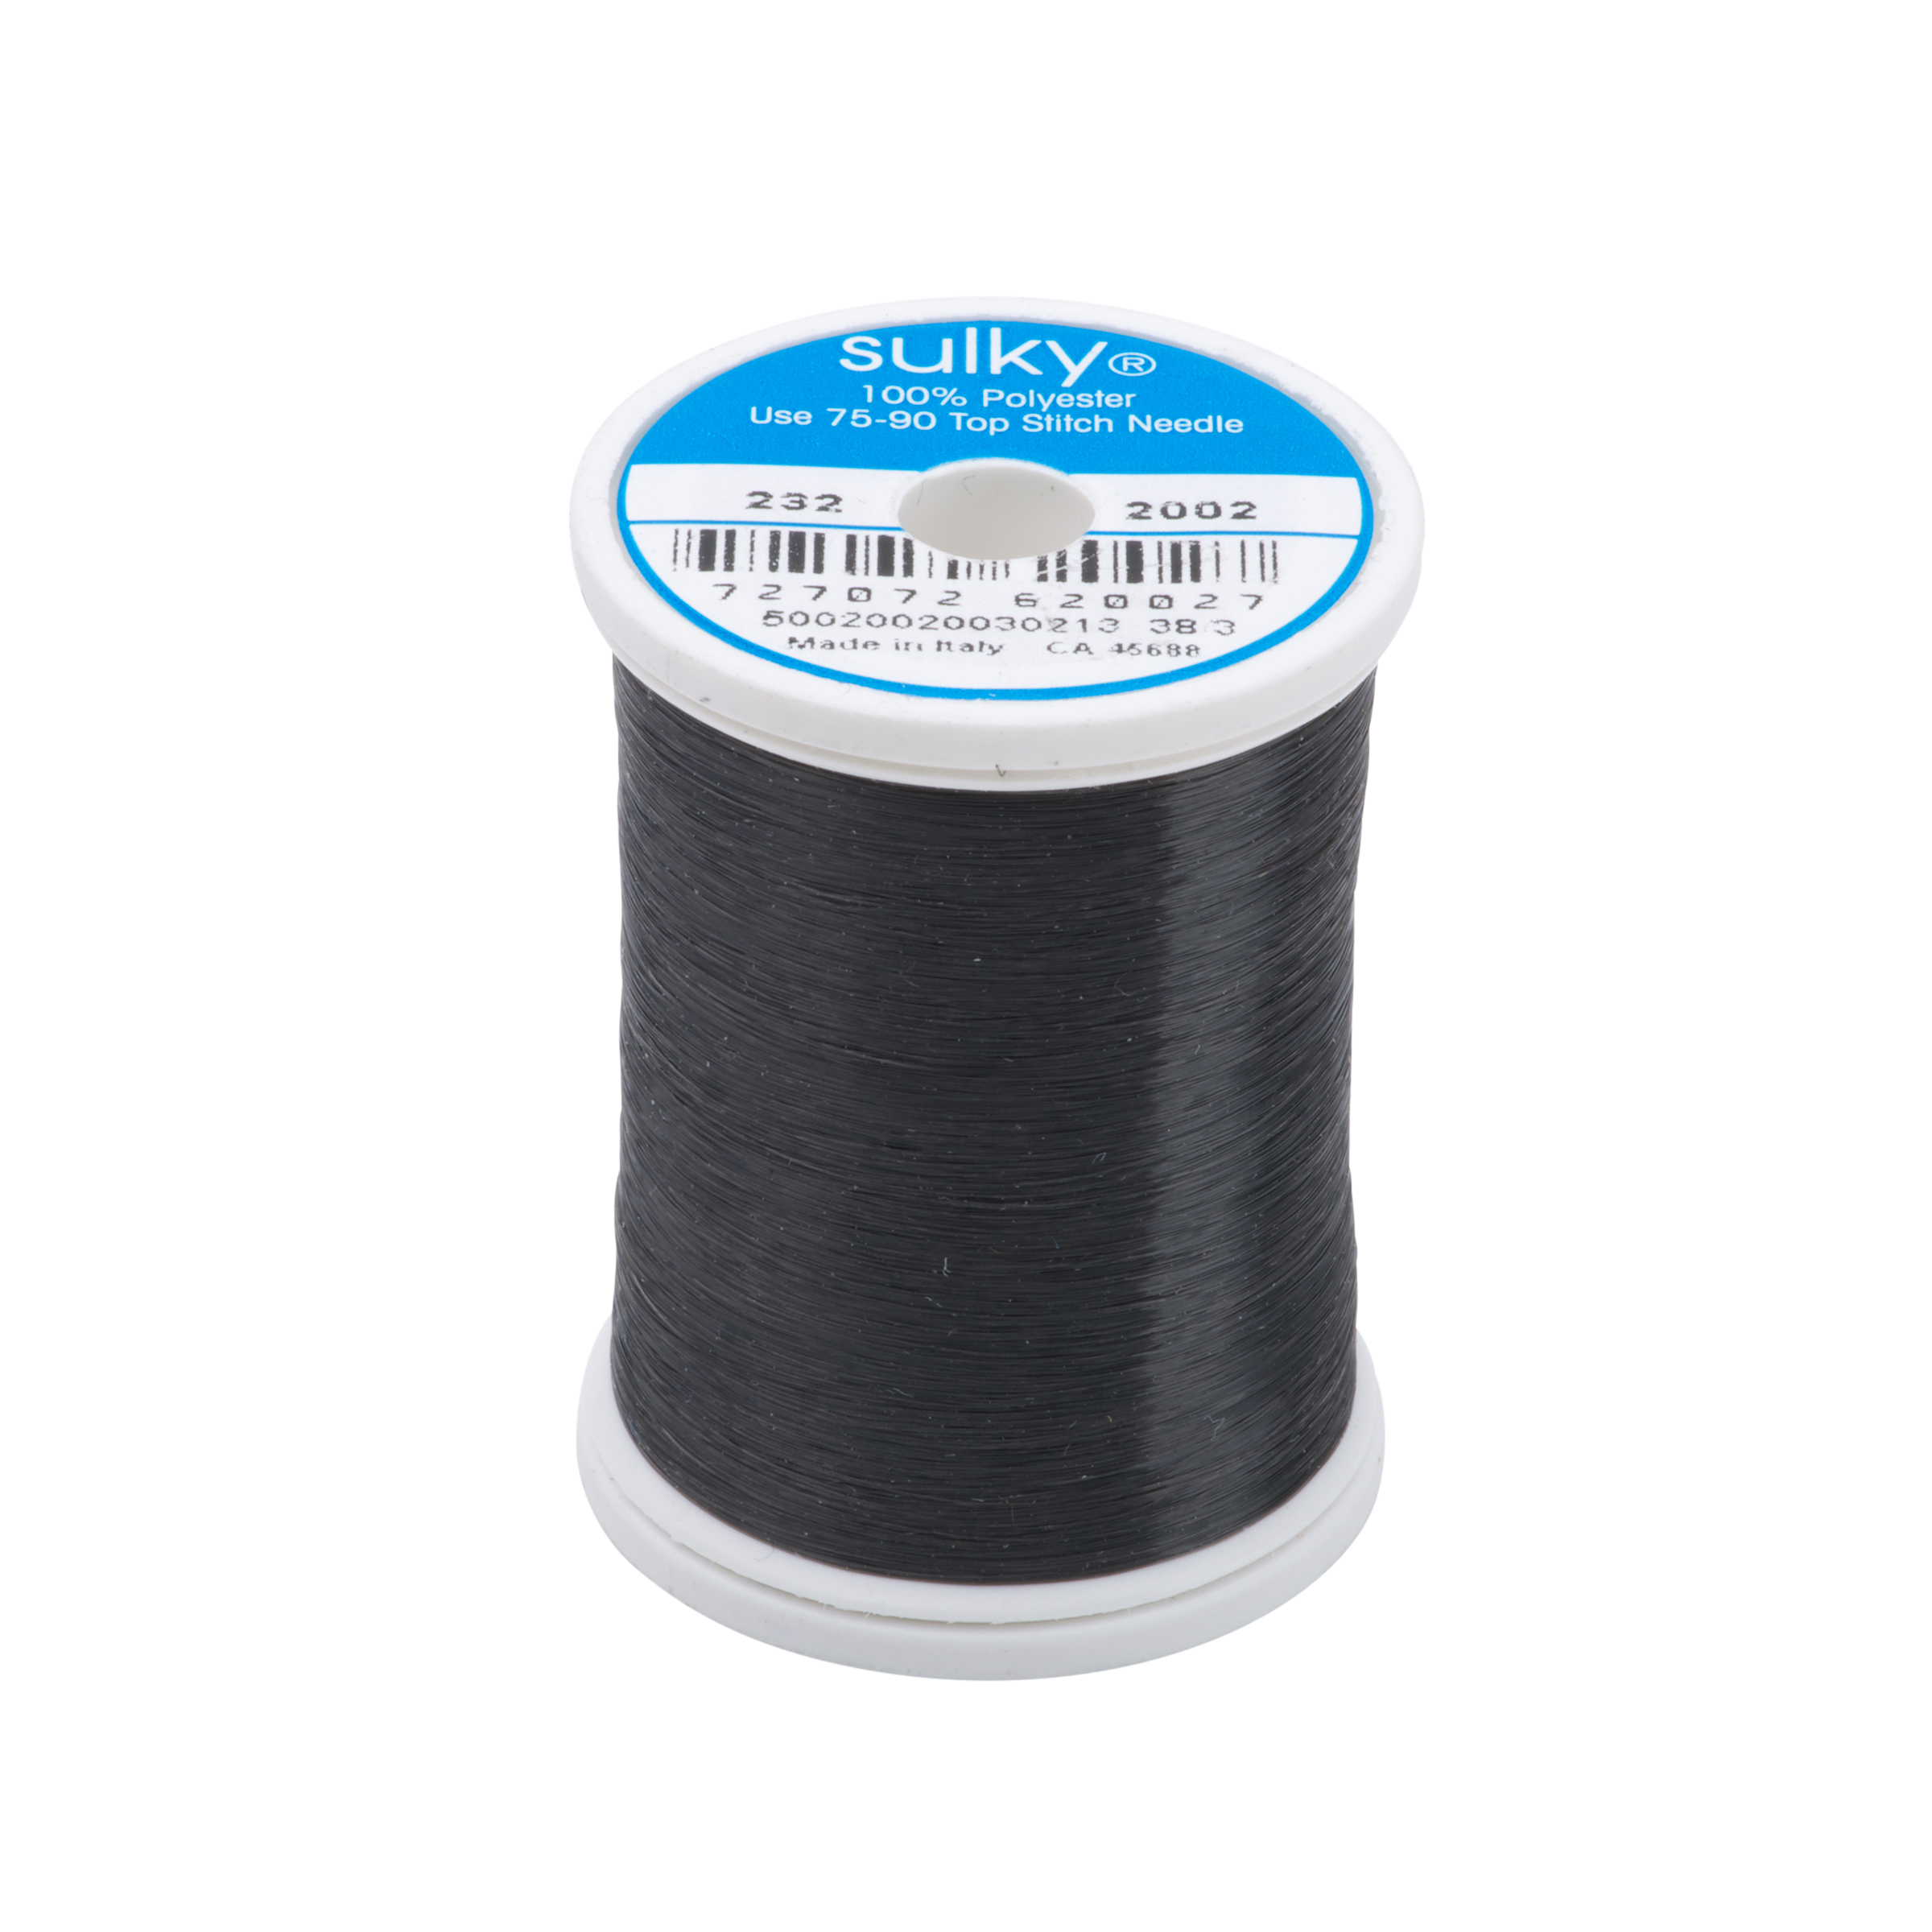 Is this thread strong enough to use on a longarm quilting machine?  If so what size needle and stitch length?